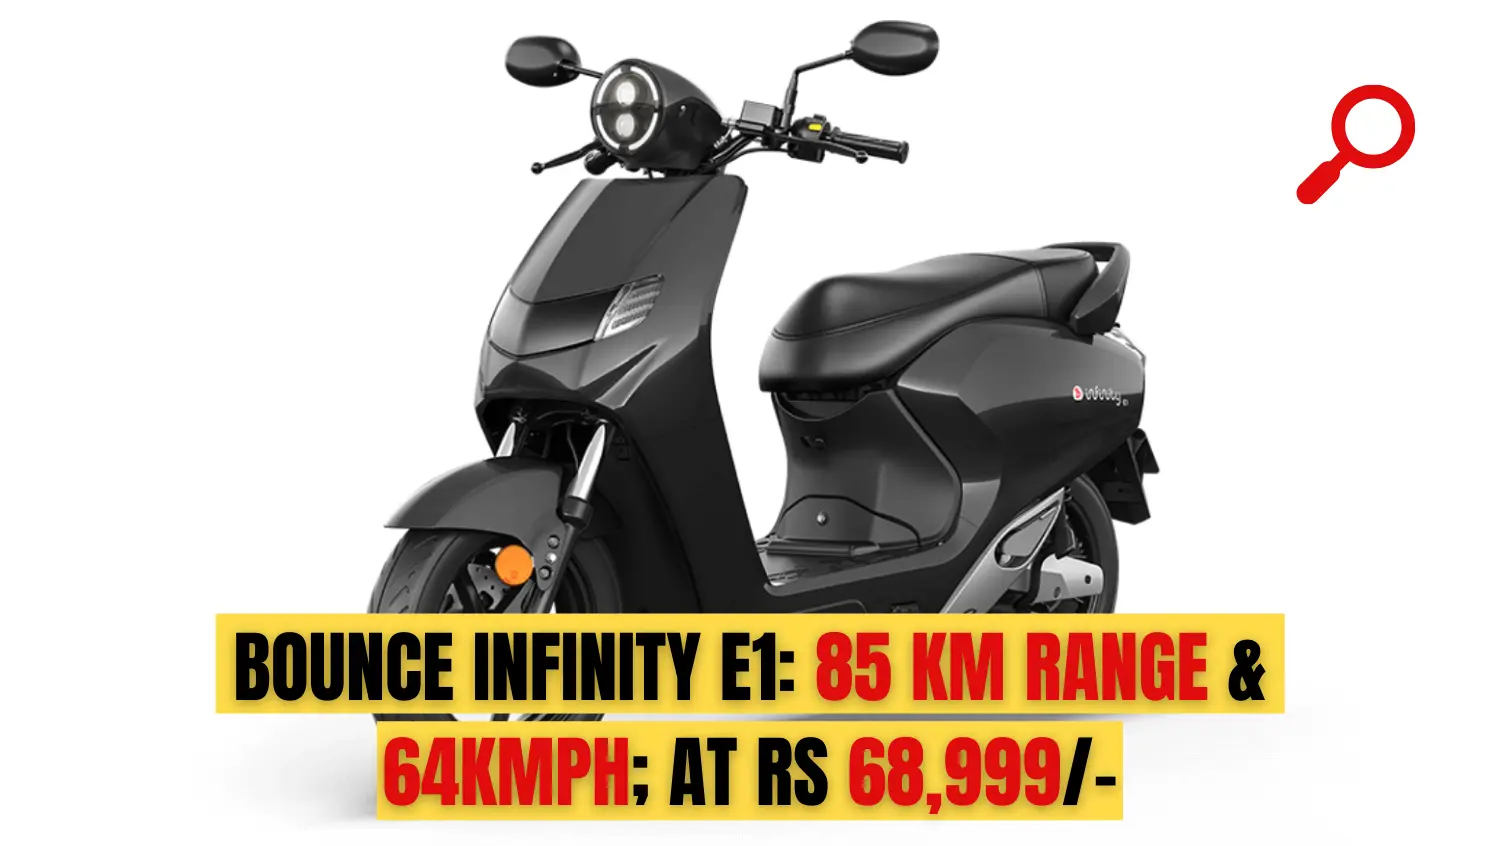 Bounce Infinity Electric Scooter E1 With 85 Km Range & 64KMPH; only at Rs 68,999-